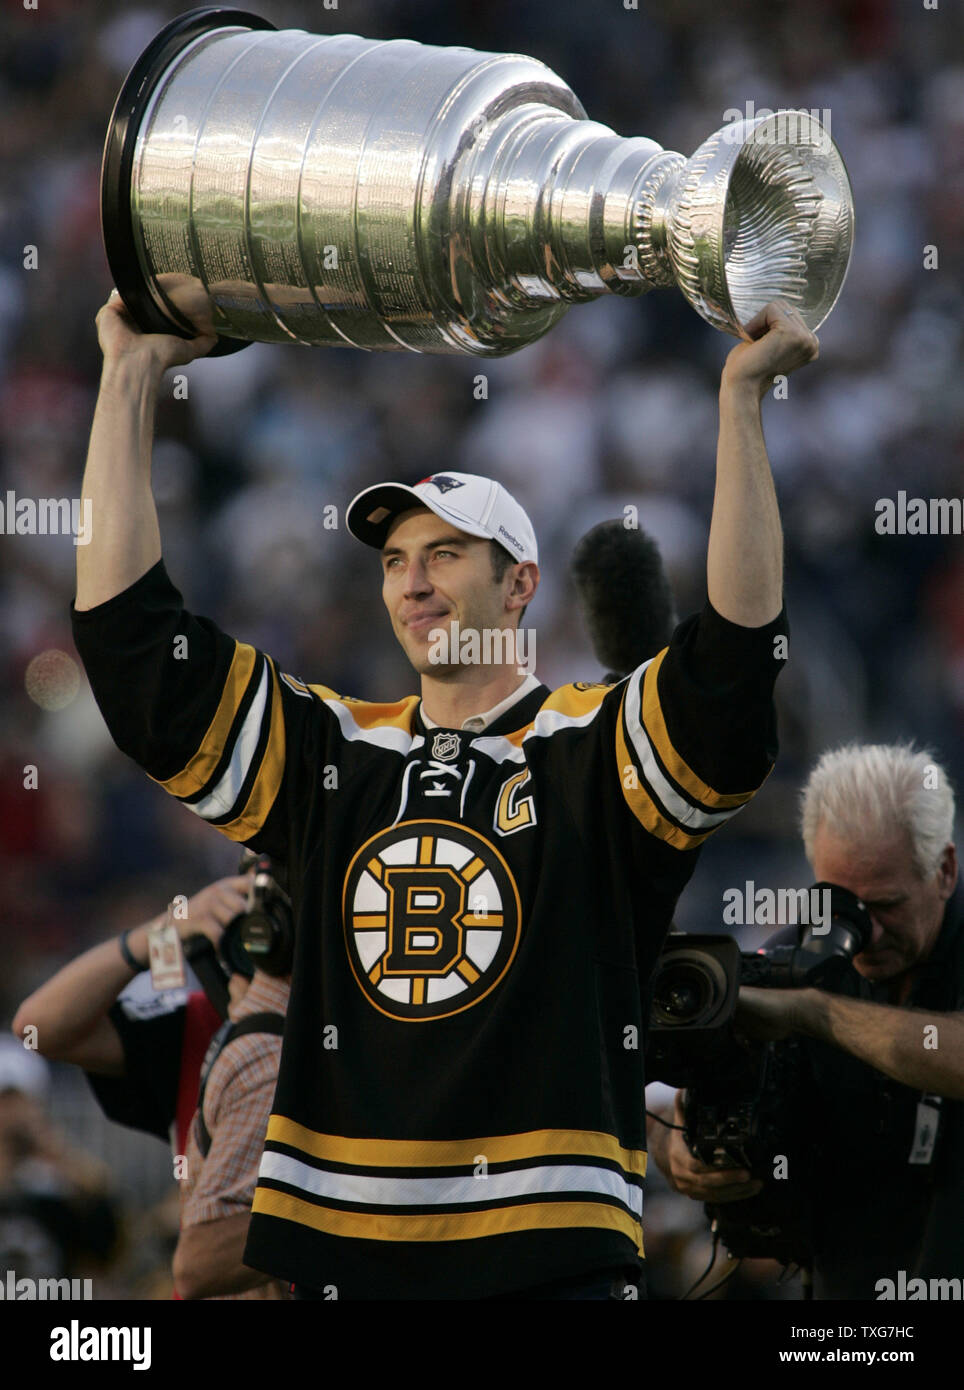 June 15, 2011; Vancouver, BC, CANADA; Boston Bruins defenseman Zdeno Chara  (33) celebrates after defeating the Vancouver Canucks 4-0 in game seven of  the 2011 Stanley Cup Finals at Rogers Arena Stock Photo - Alamy